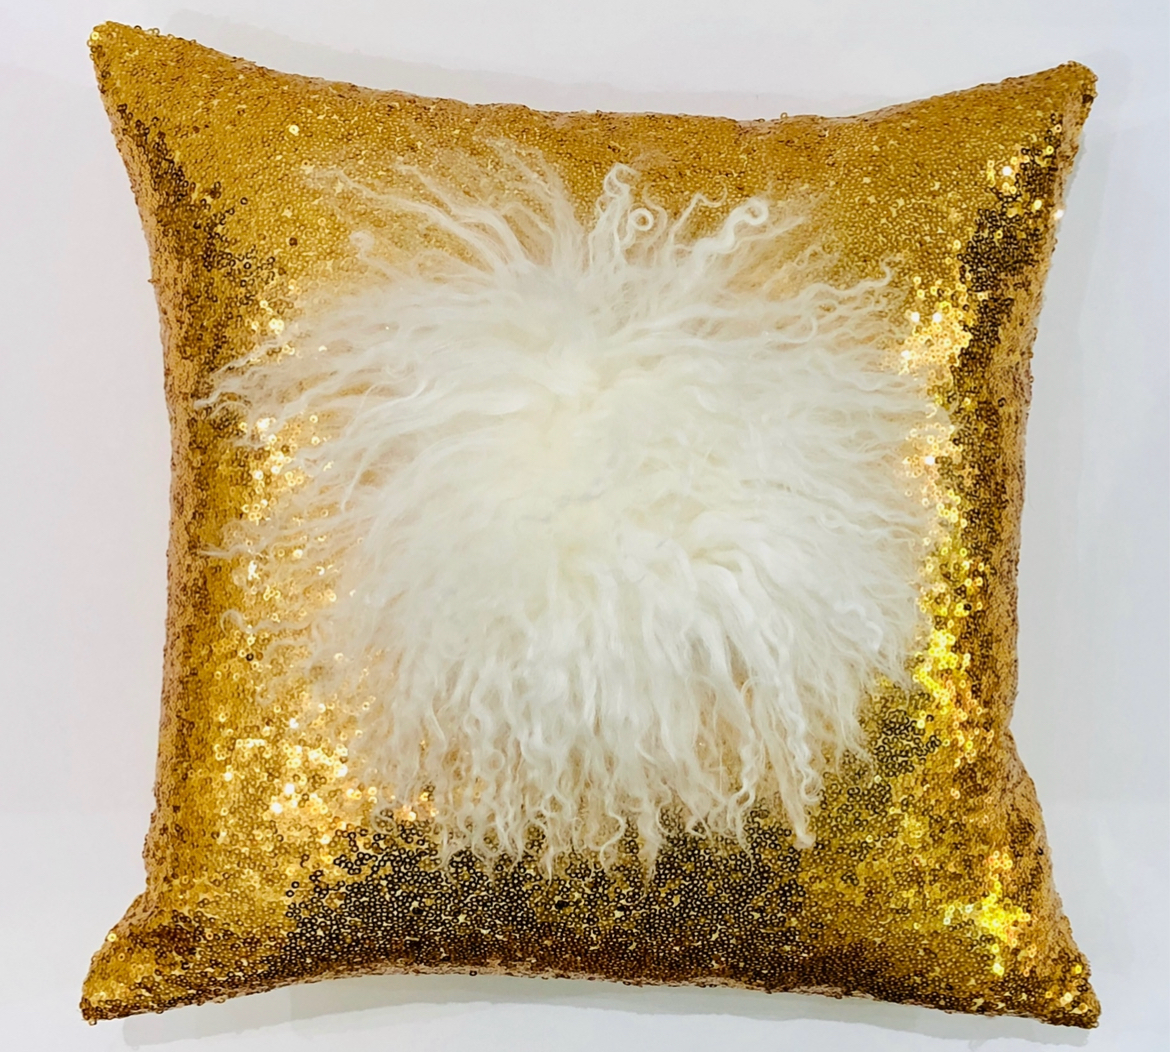 Gold Sequin Pillow with White Mongolian